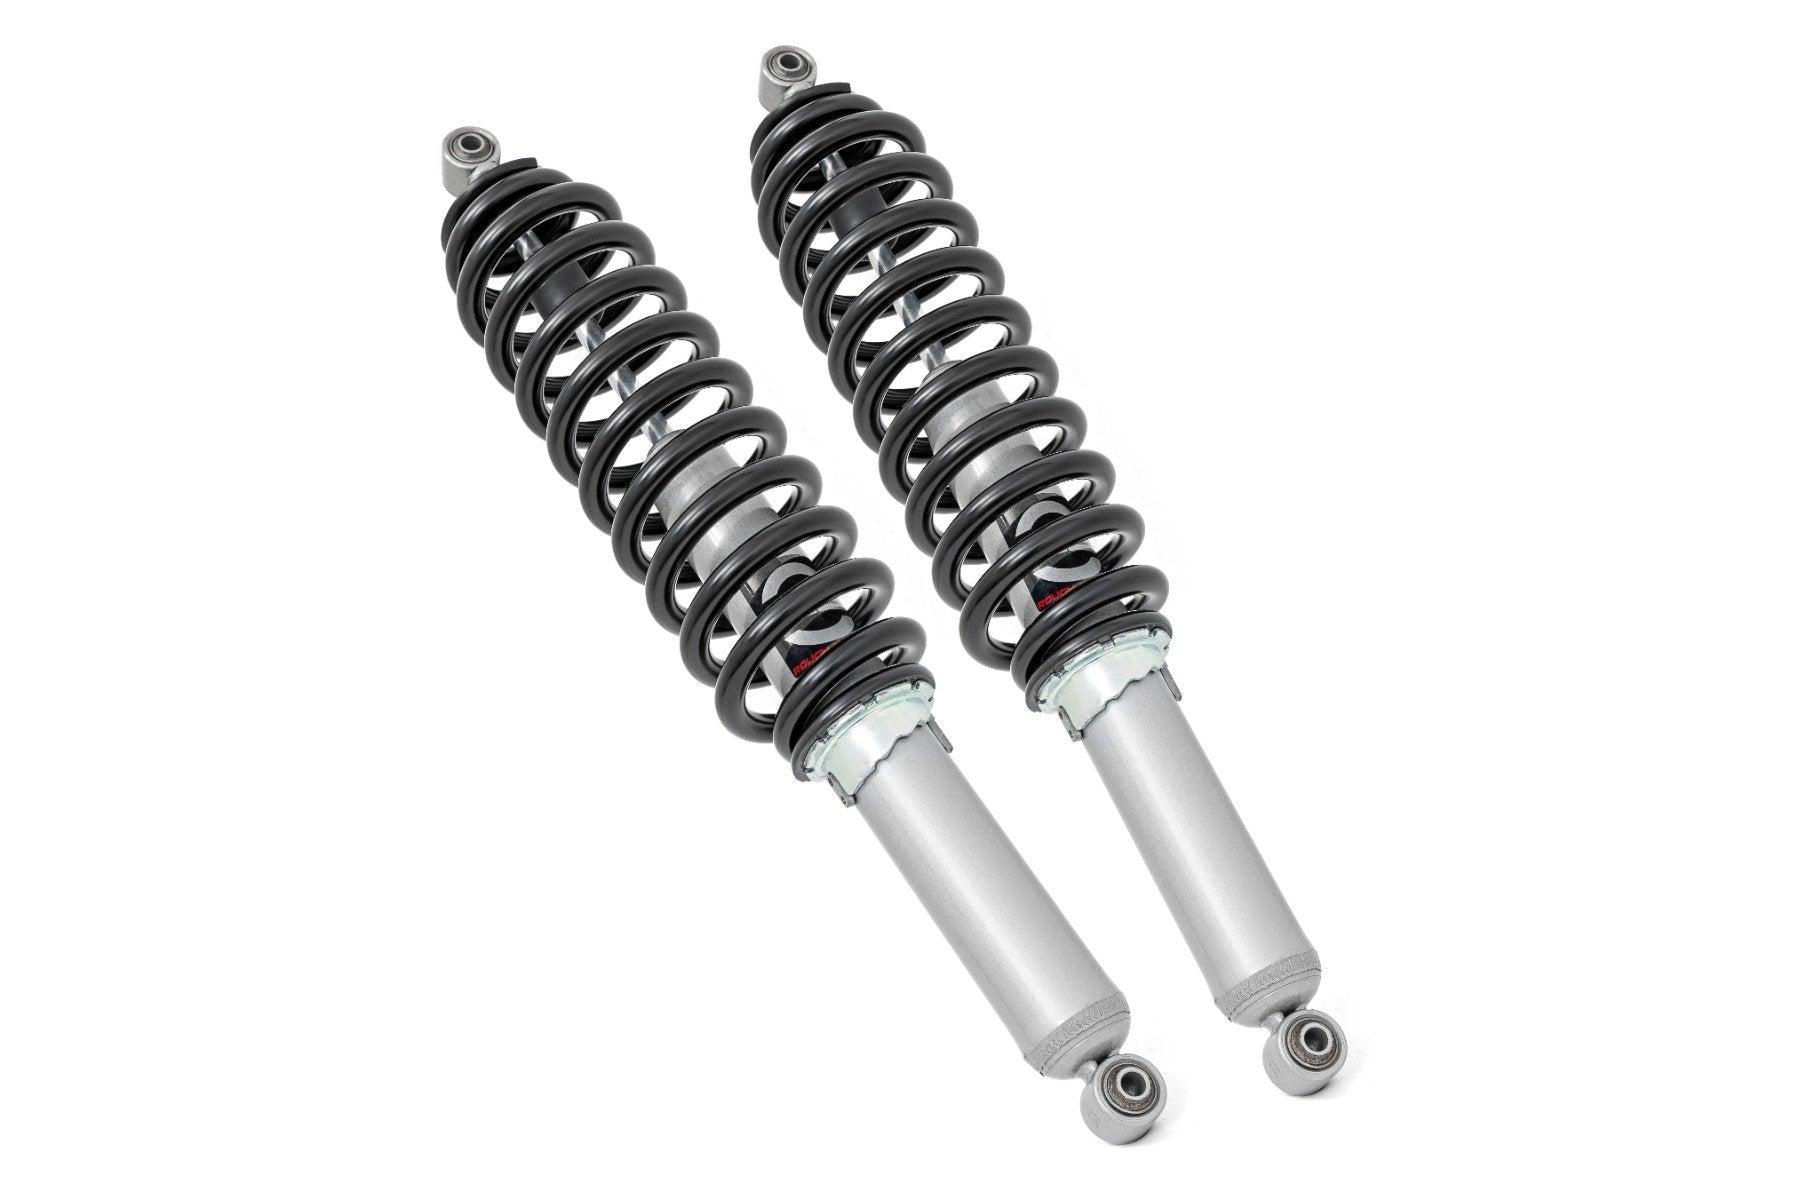 N3 Rear Coil Over Shocks | Offroad Ranger Polaris & | Stock Performance – Extreme